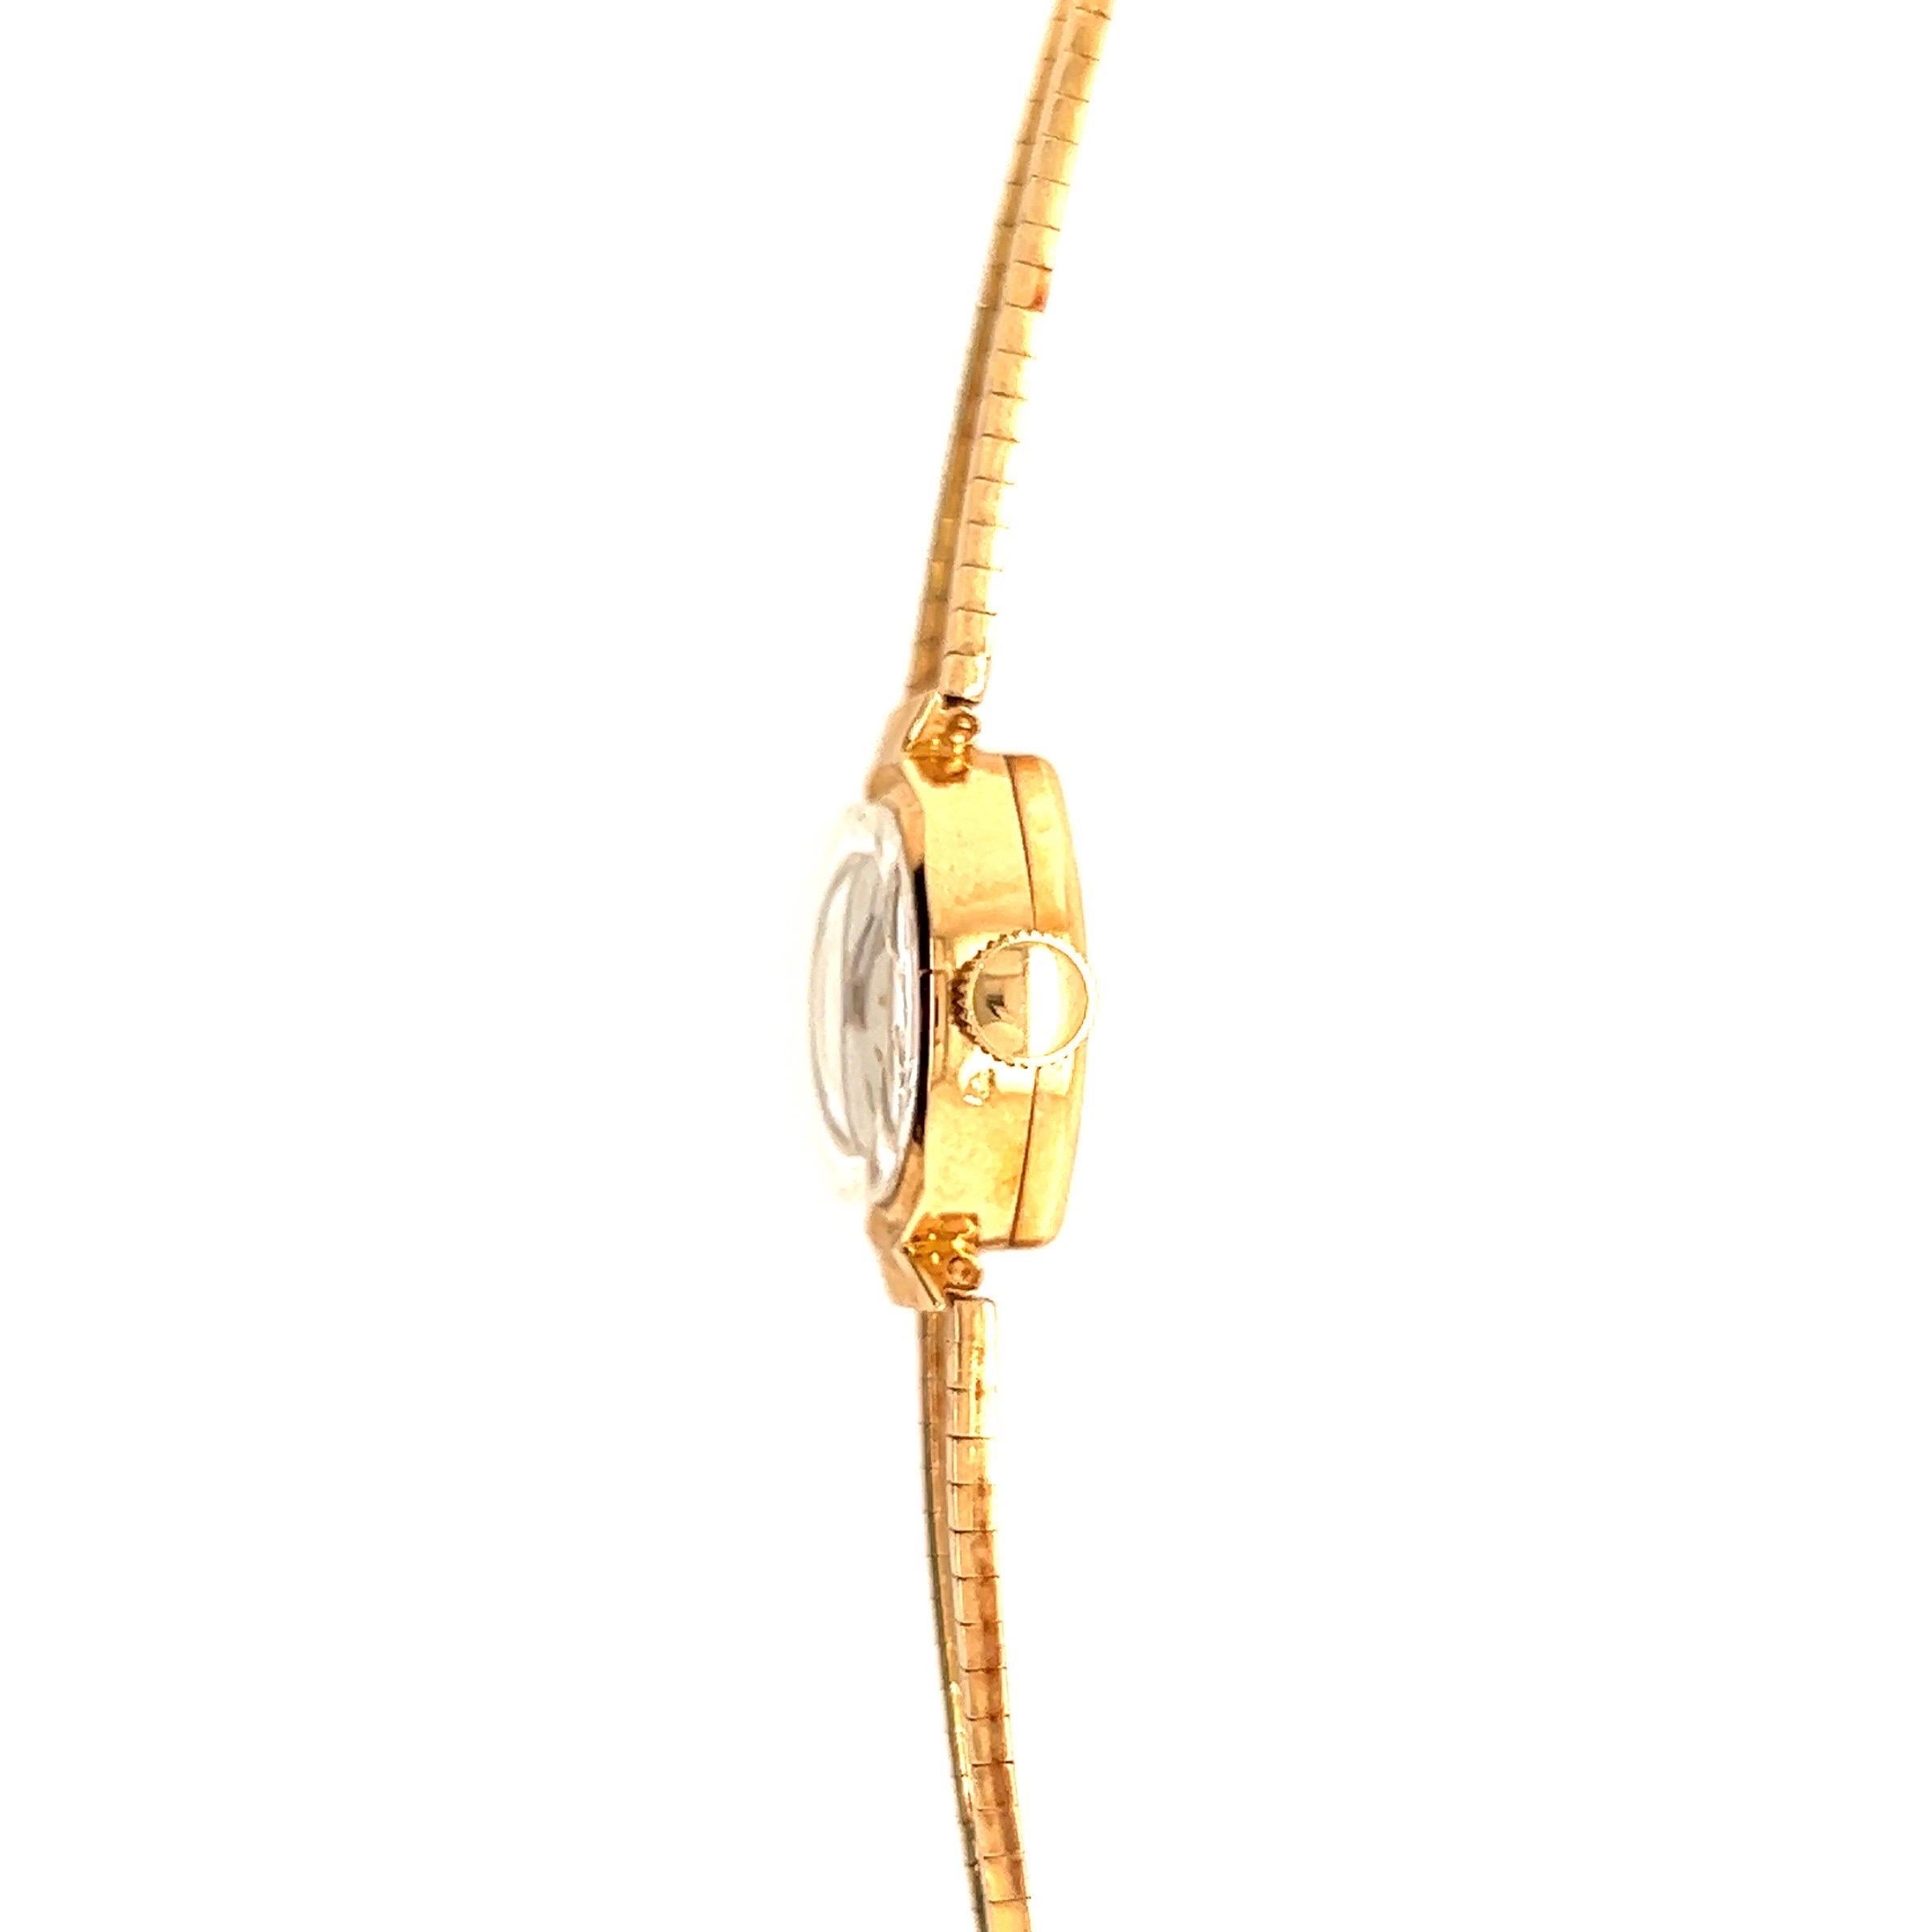 Looking for a women's wristwatch that combines retro style and sophistication? Look no further than the LOV women's wristwatch.

Meticulously crafted, this vintage watch combines classic elegance with a timeless retro aesthetic. This wristwatch is a